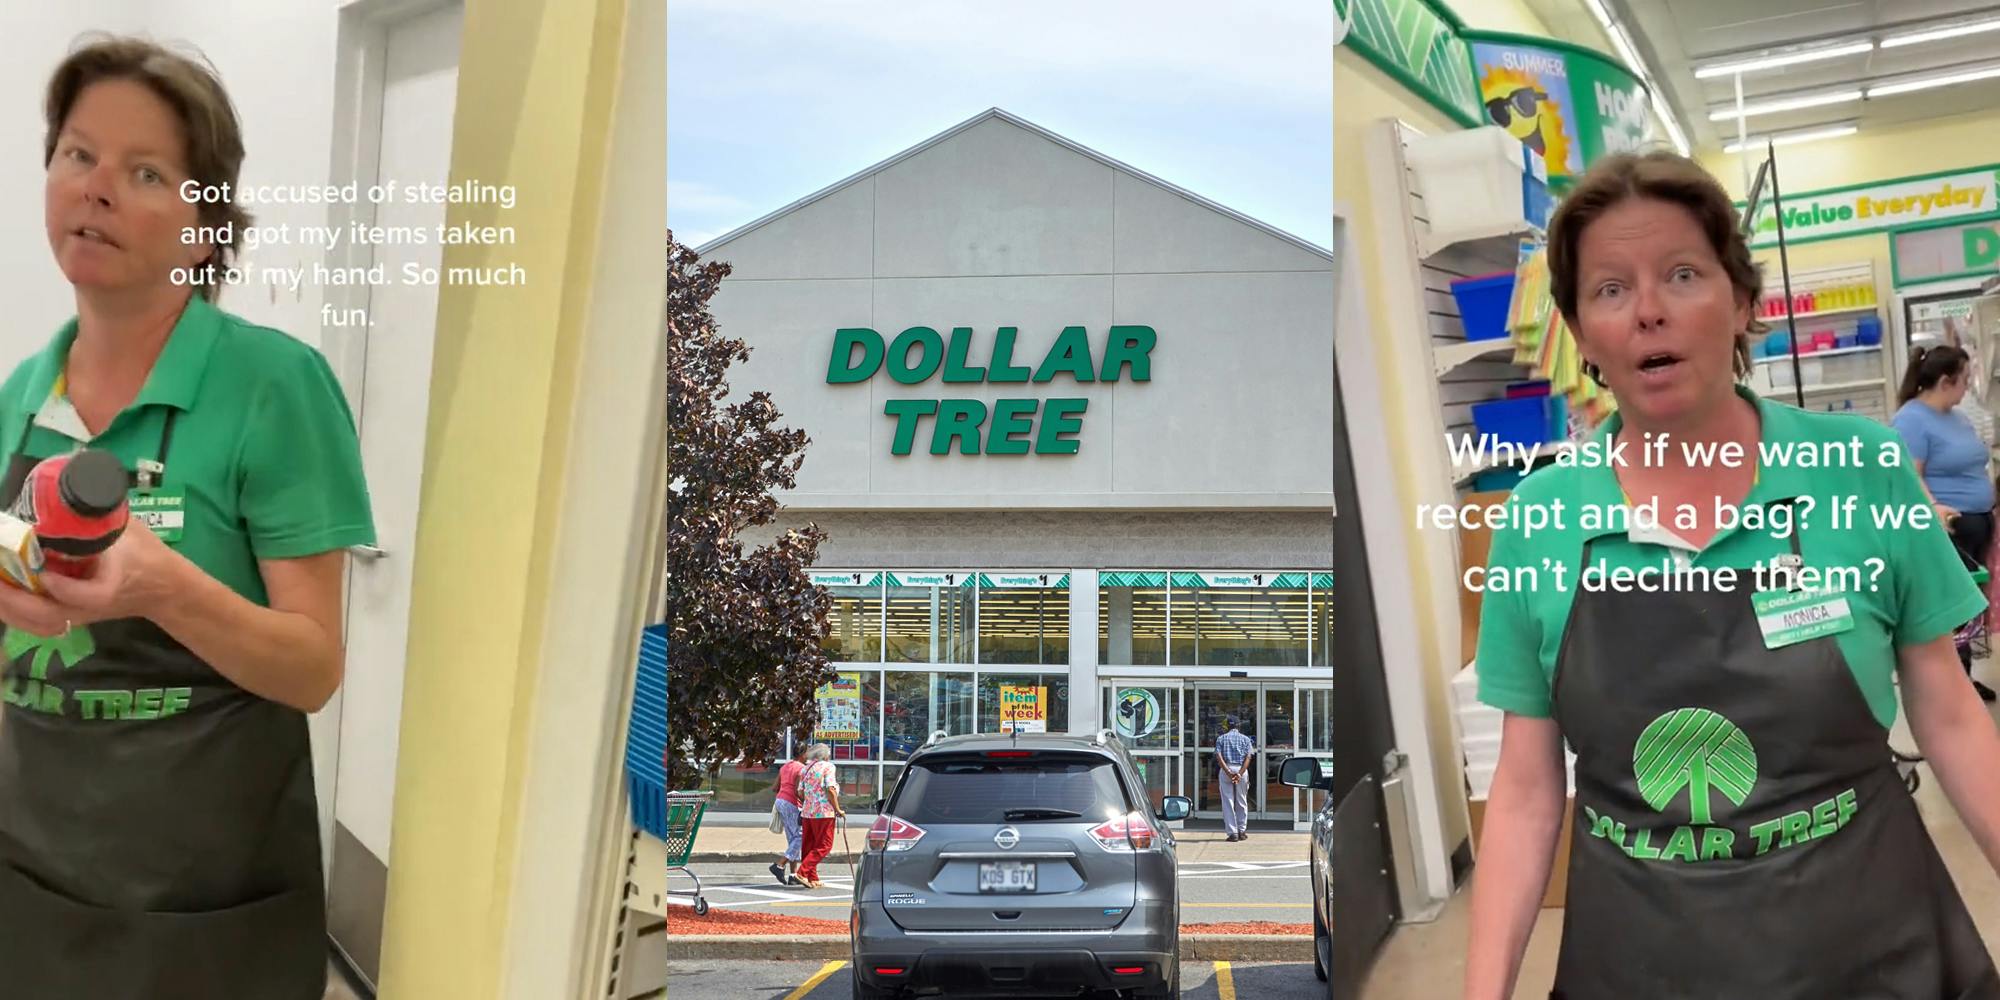 Dollar Tree worker with caption "Got accused of stealing and got my items taken out of my hand. So much fun." (l) Dollar Tree building with sign (c) Dollar Tree worker with caption "Why ask if we want a receipt and a bag? If we can't decline them" (r)